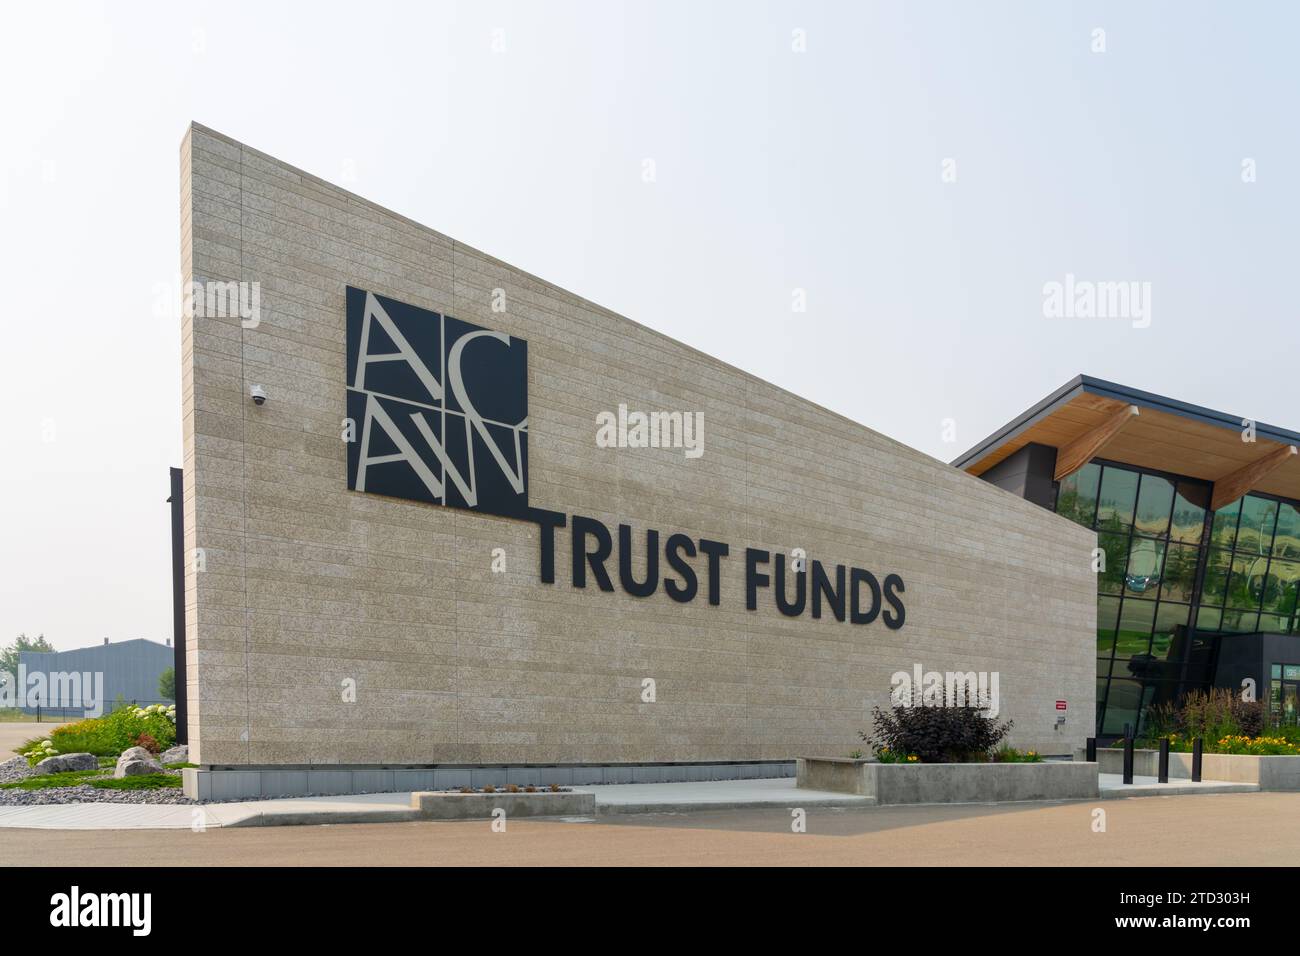 The Alberta Carpenters and Allied Workers (ACAW) Trust Funds headquarters in Edmonton, Alberta, Canada Stock Photo